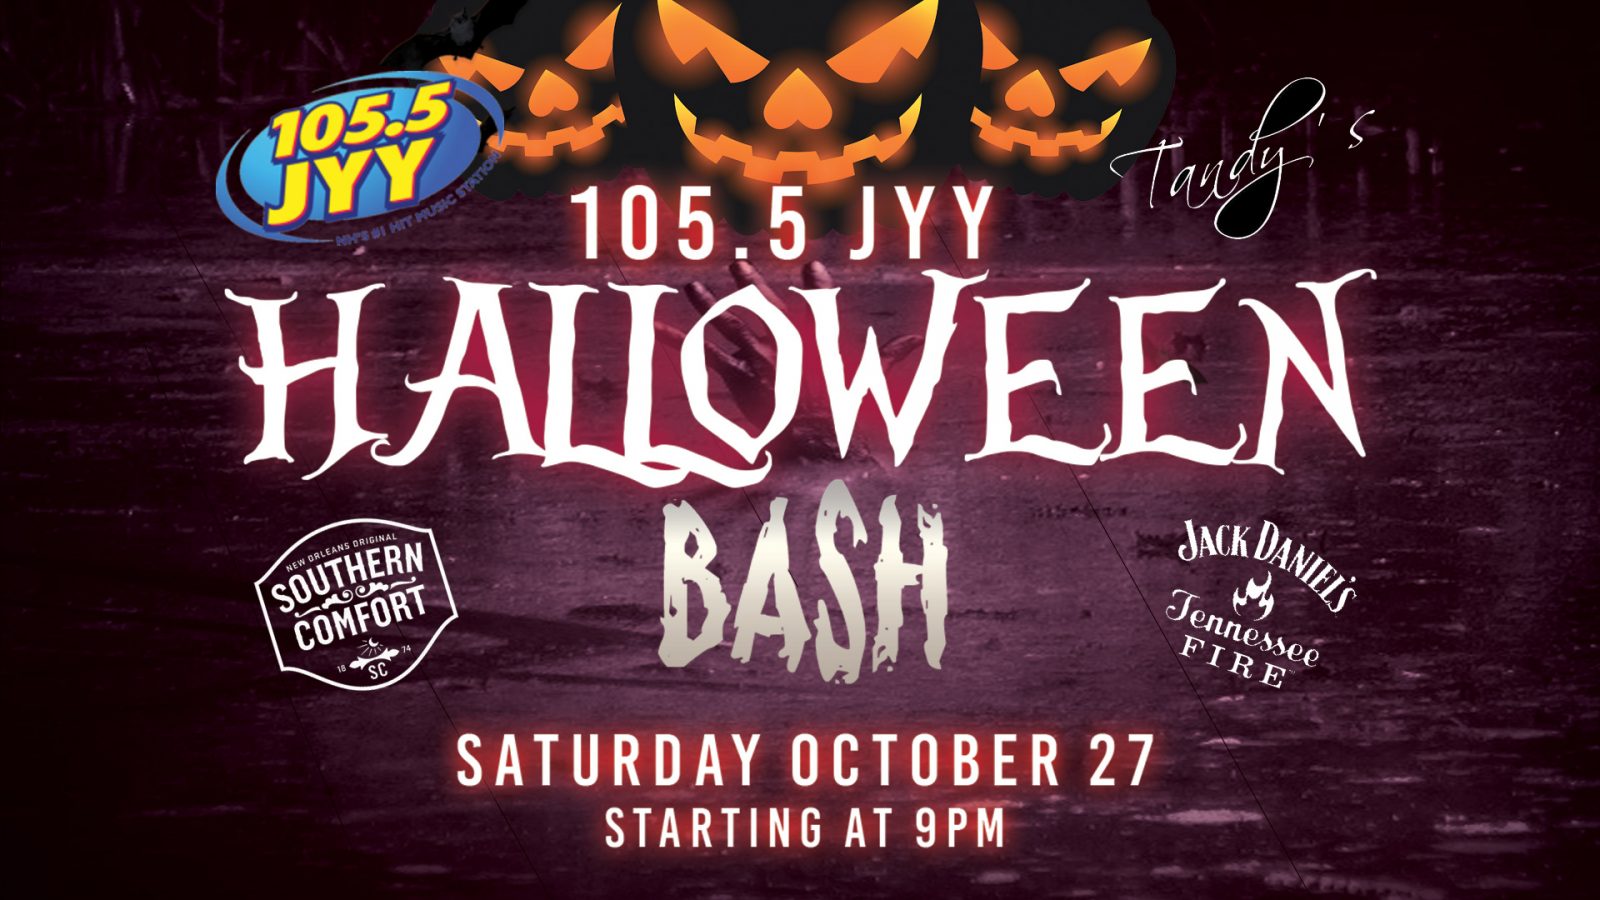 Don’t Miss JYY’s ‘Halloween Bash’ at Tandy’s Pub